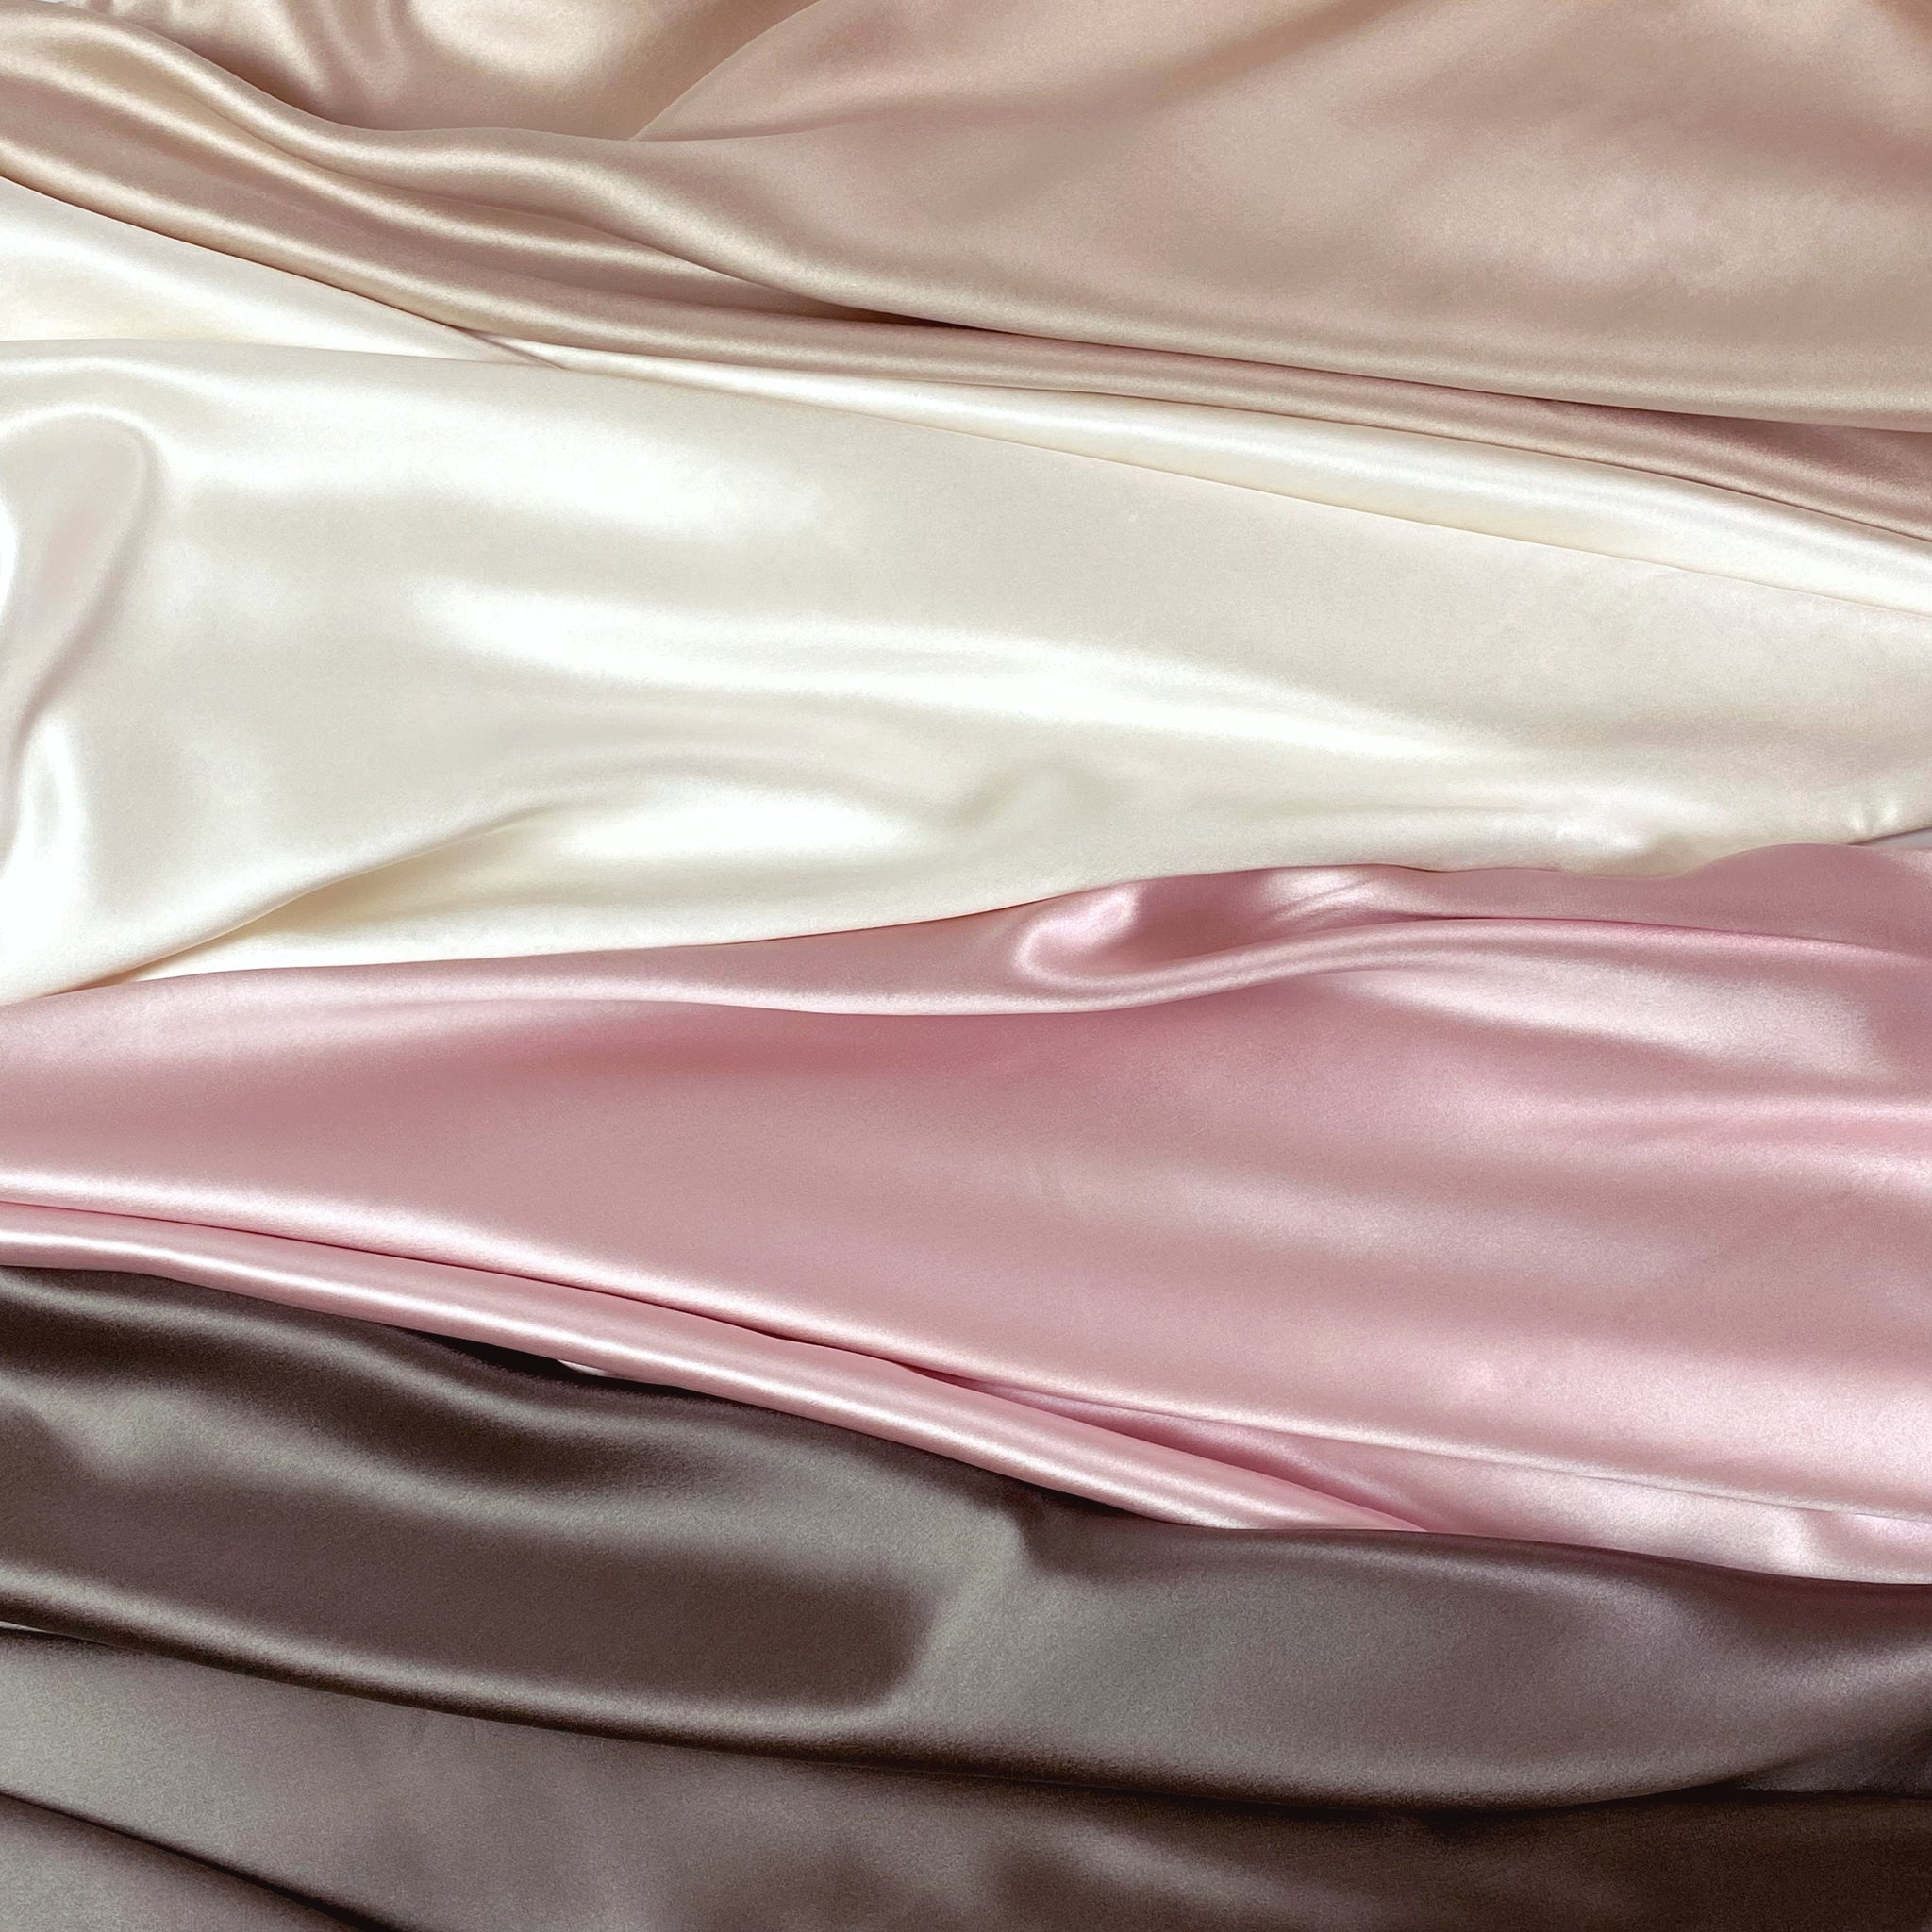 How to tell if silk is real or fake?